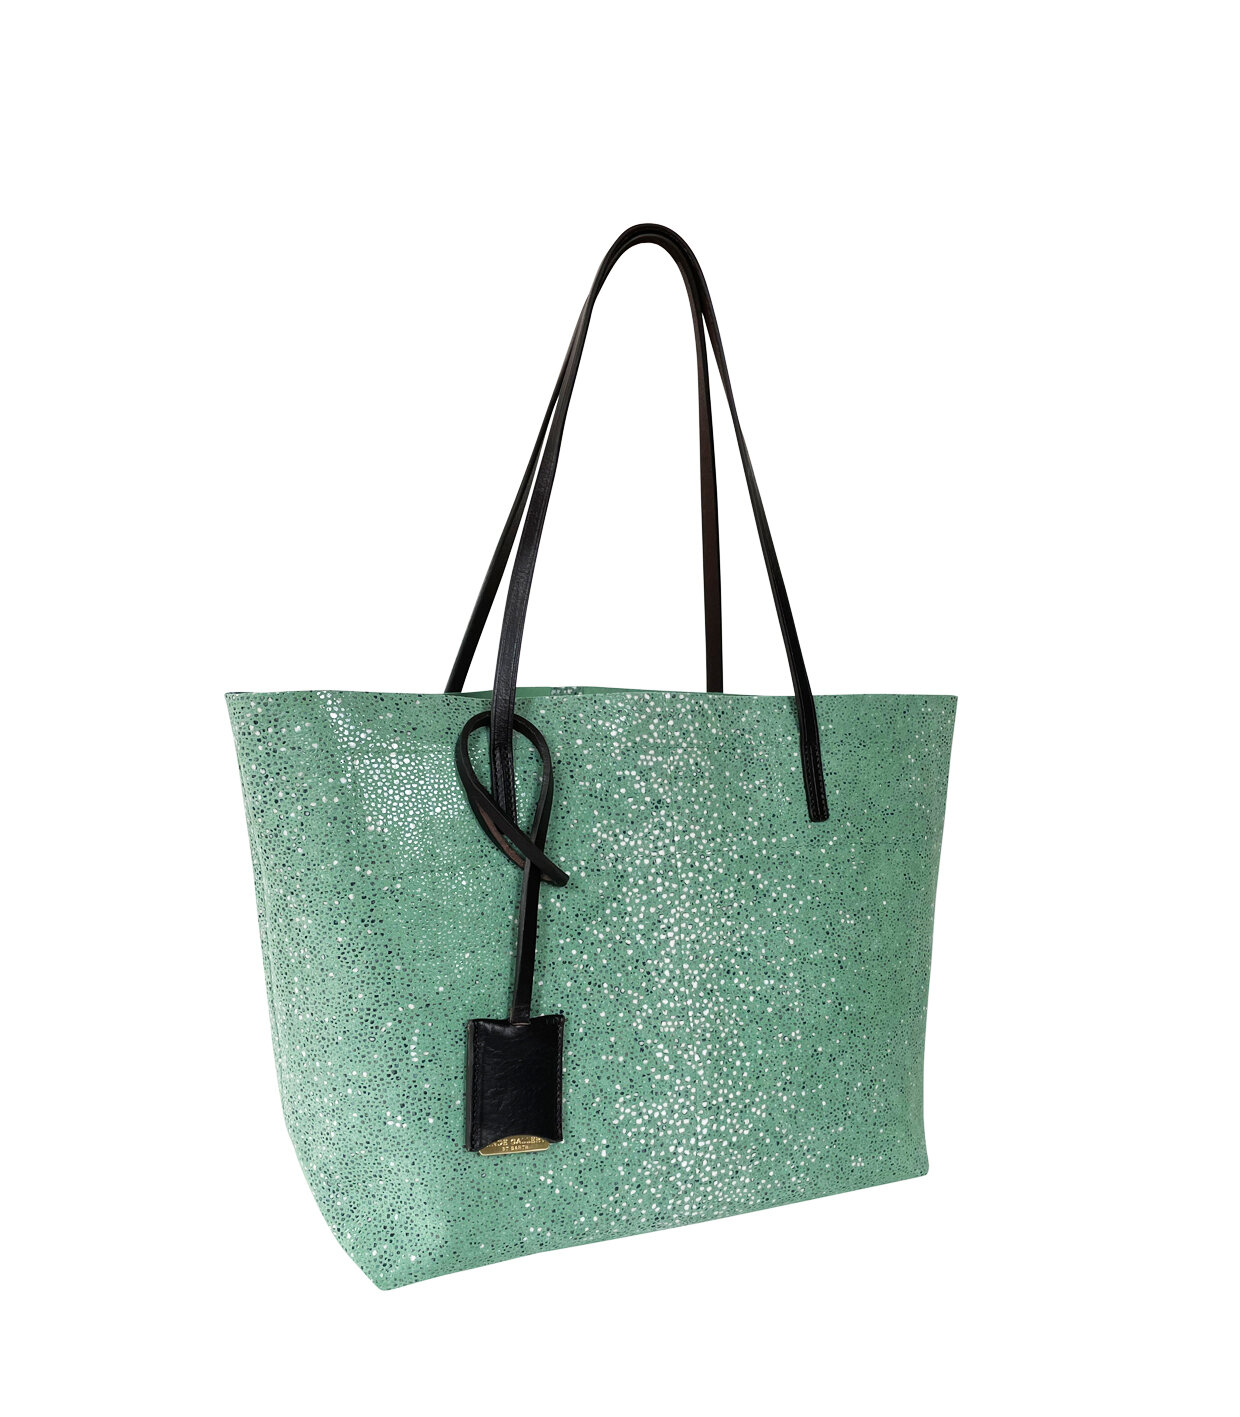 GOUVERNEUR S - GALUCHAT - PRINTED SUEDE - MINT — Linde Gallery St-Barth